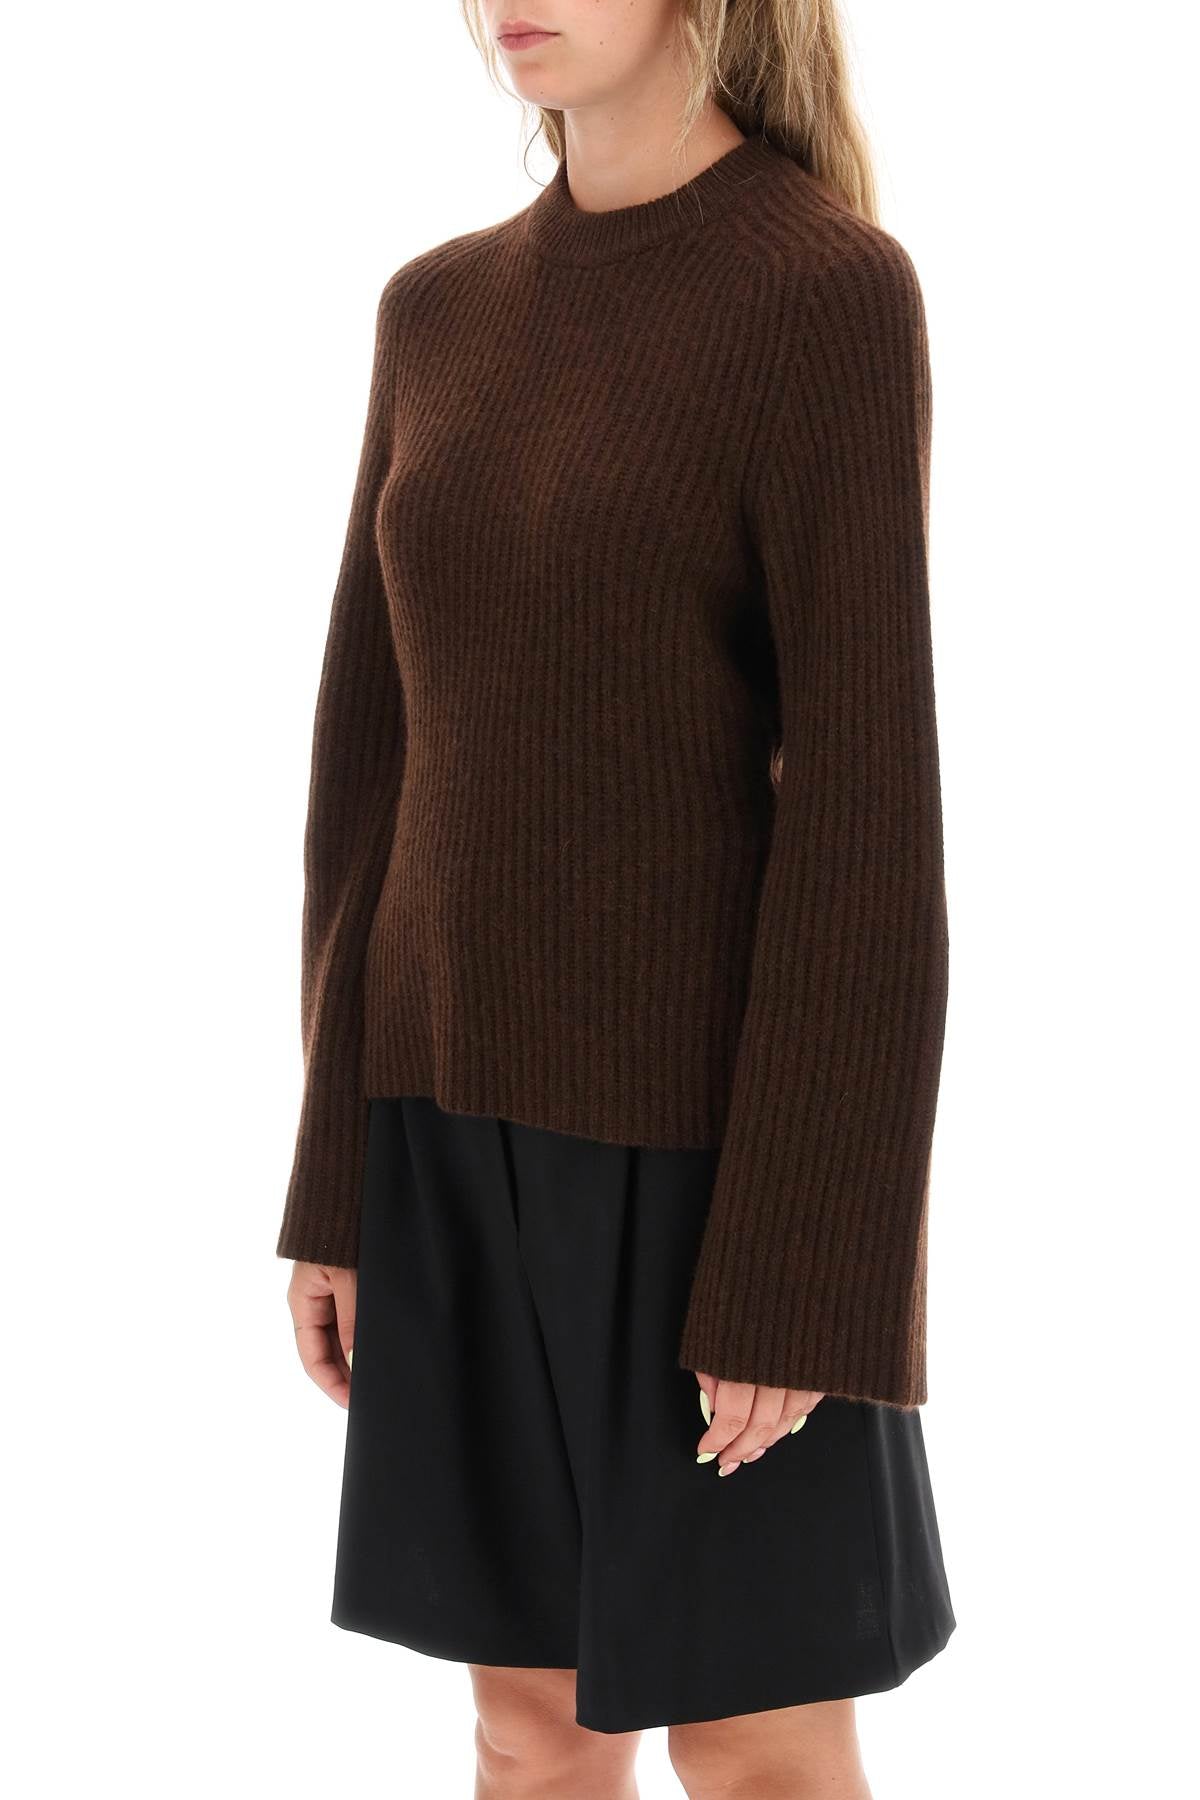 Loulou studio 'kota' cashmere sweater with bell sleeves-3